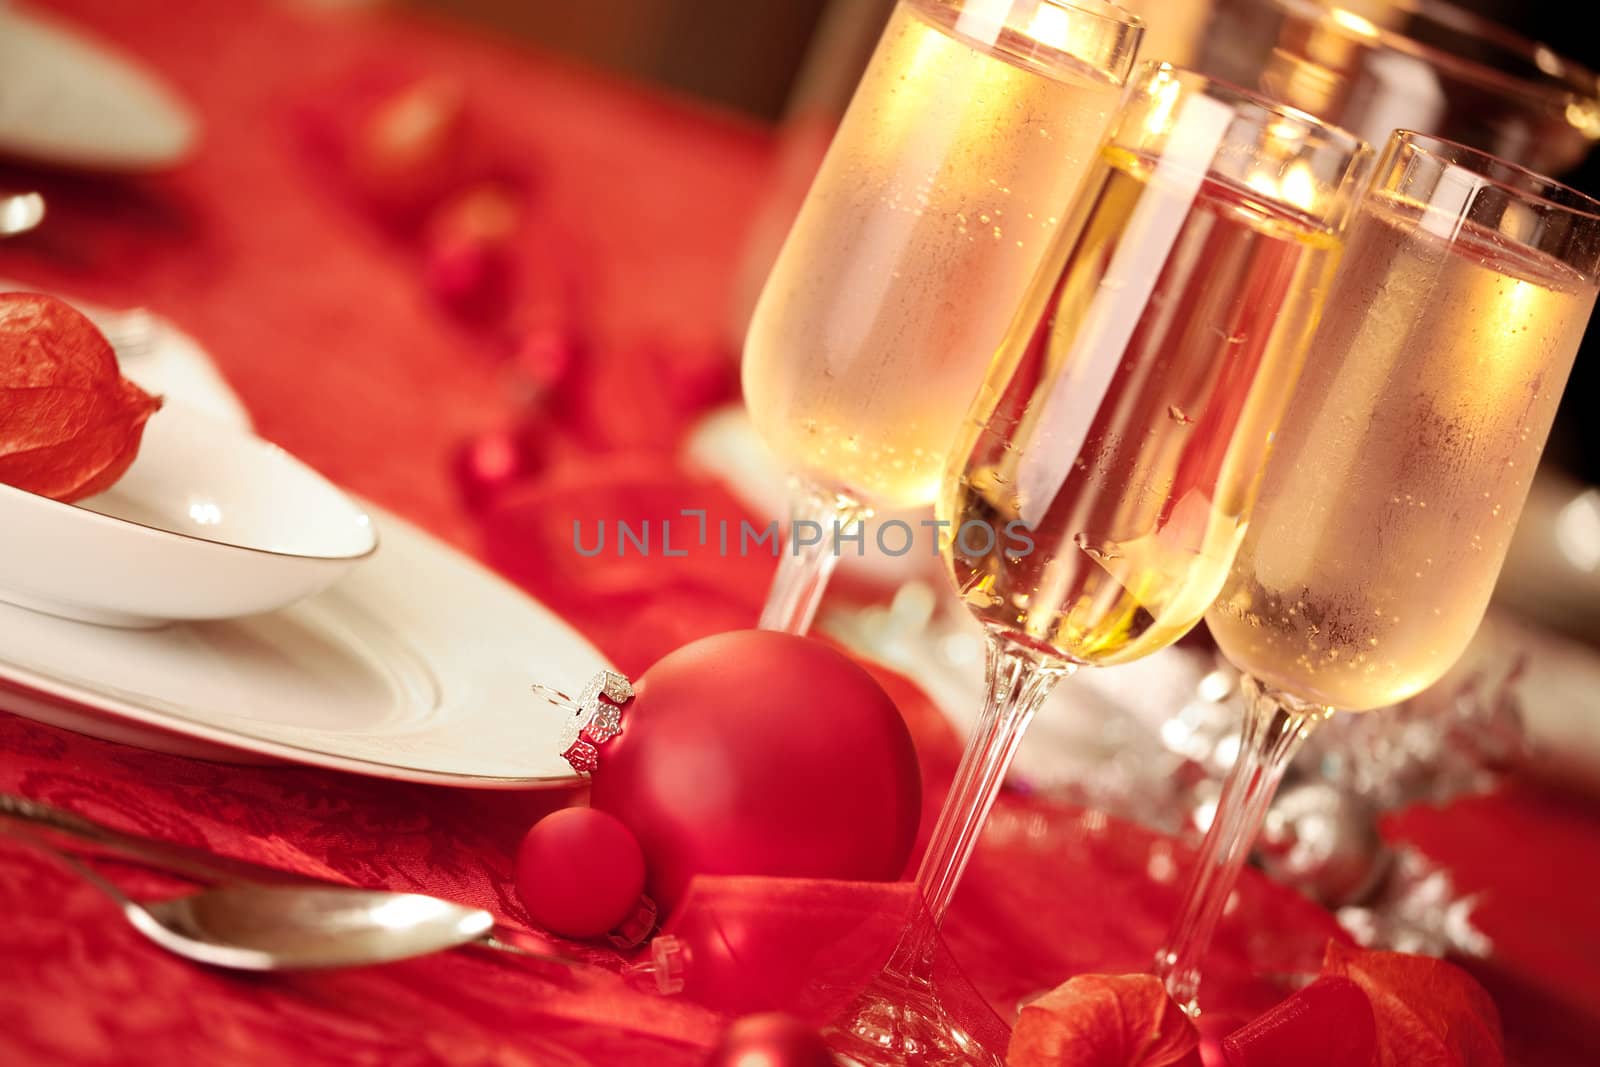 Elegant Christmas table setting in red with a Christmas ornament  as focal point